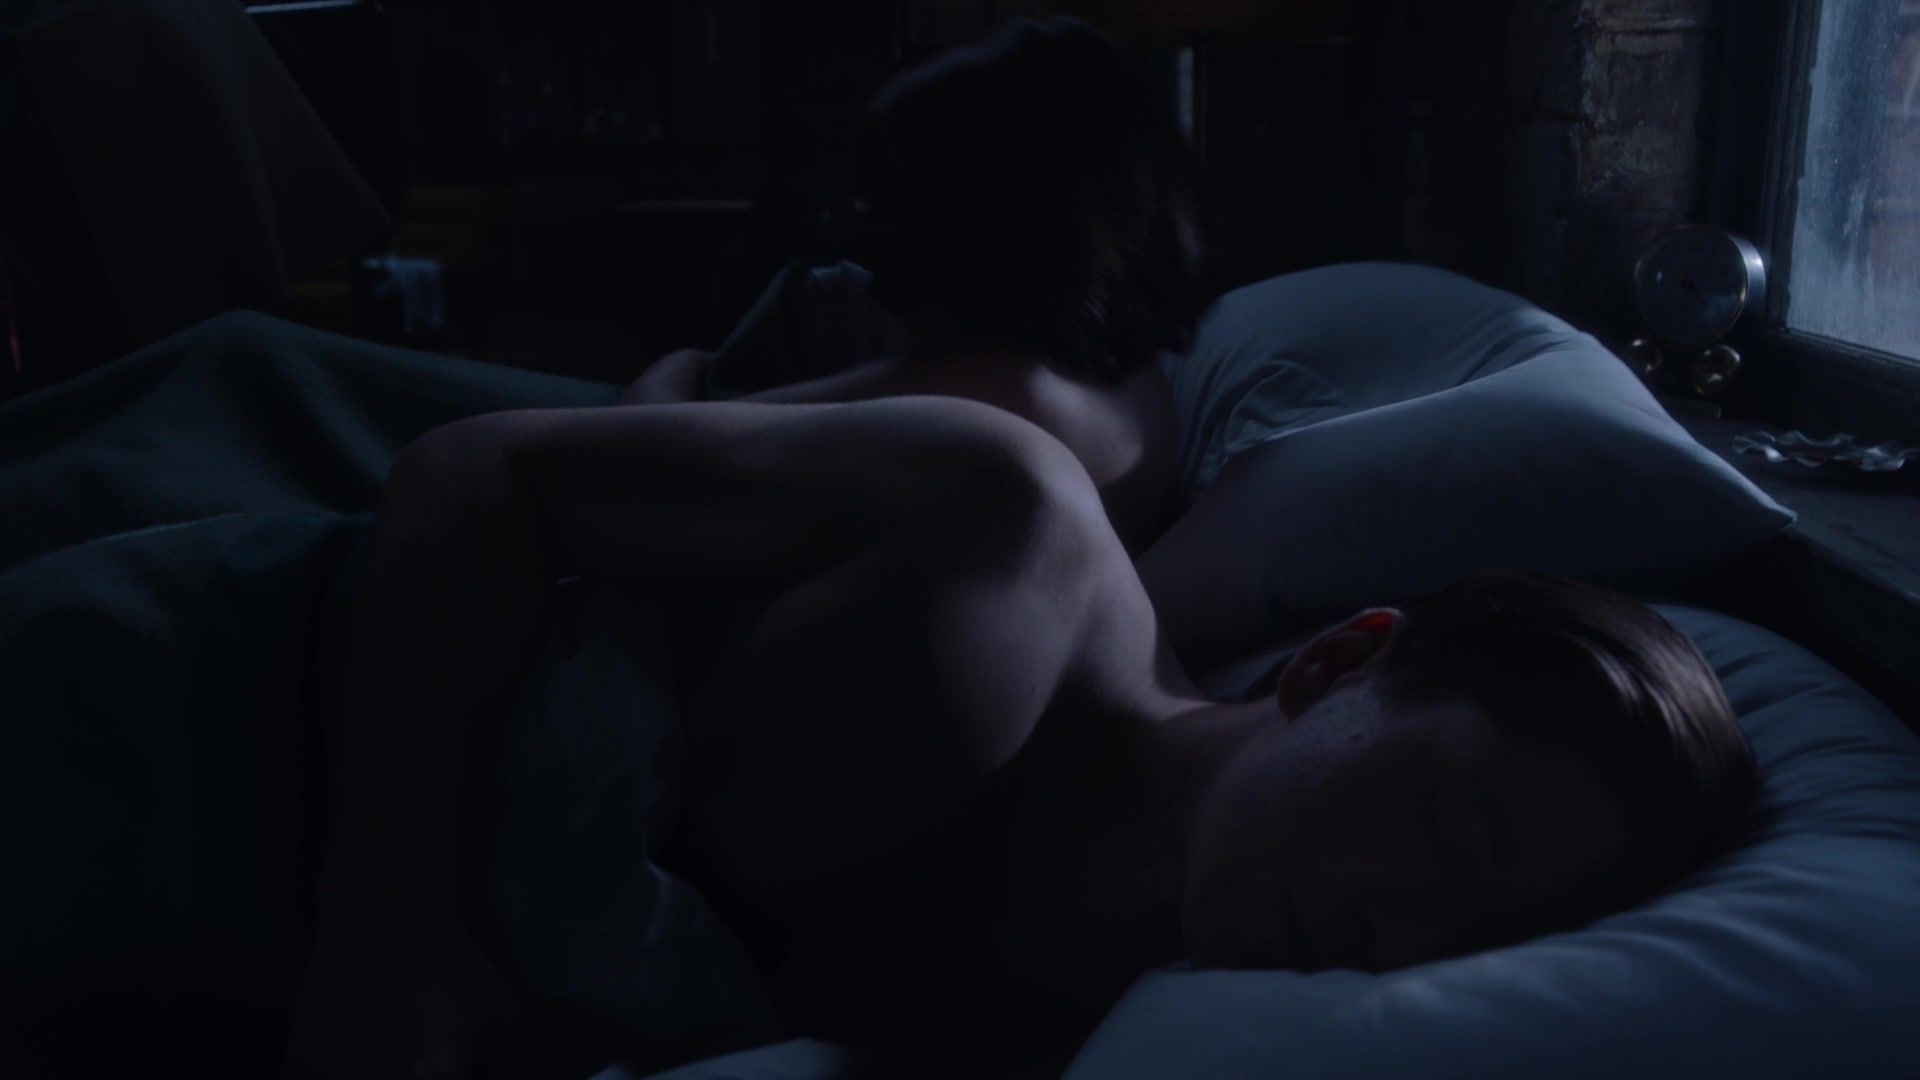 Chile Nude Rachel Brosnahan – The Marvelous Mrs Maisel s03e01 (2019) Tight Pussy Porn